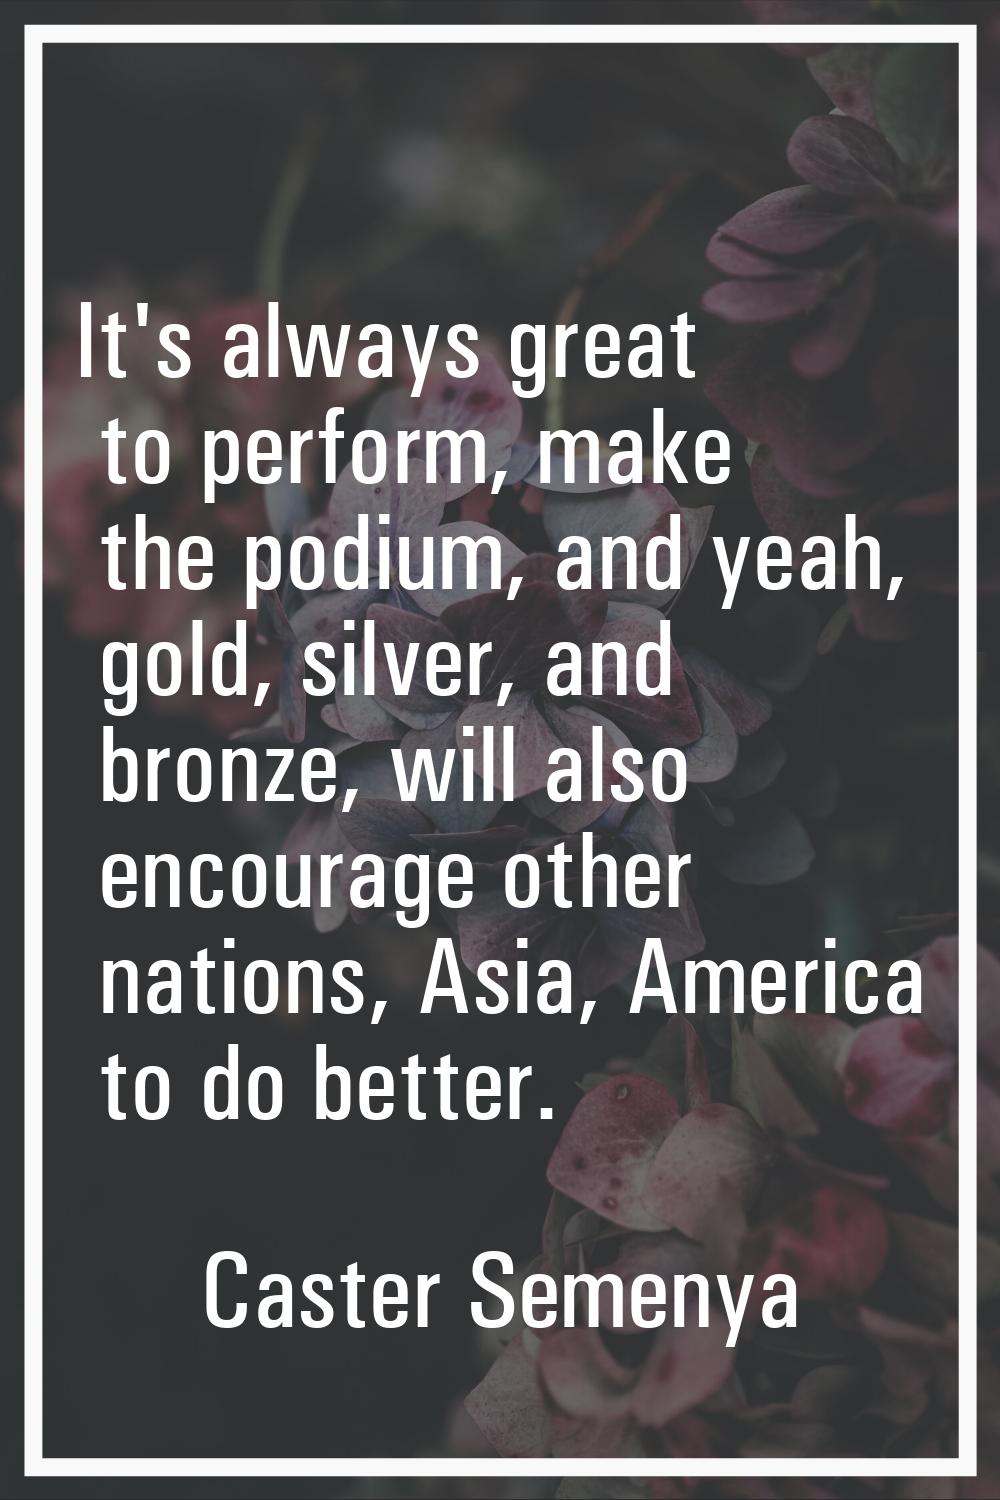 It's always great to perform, make the podium, and yeah, gold, silver, and bronze, will also encour